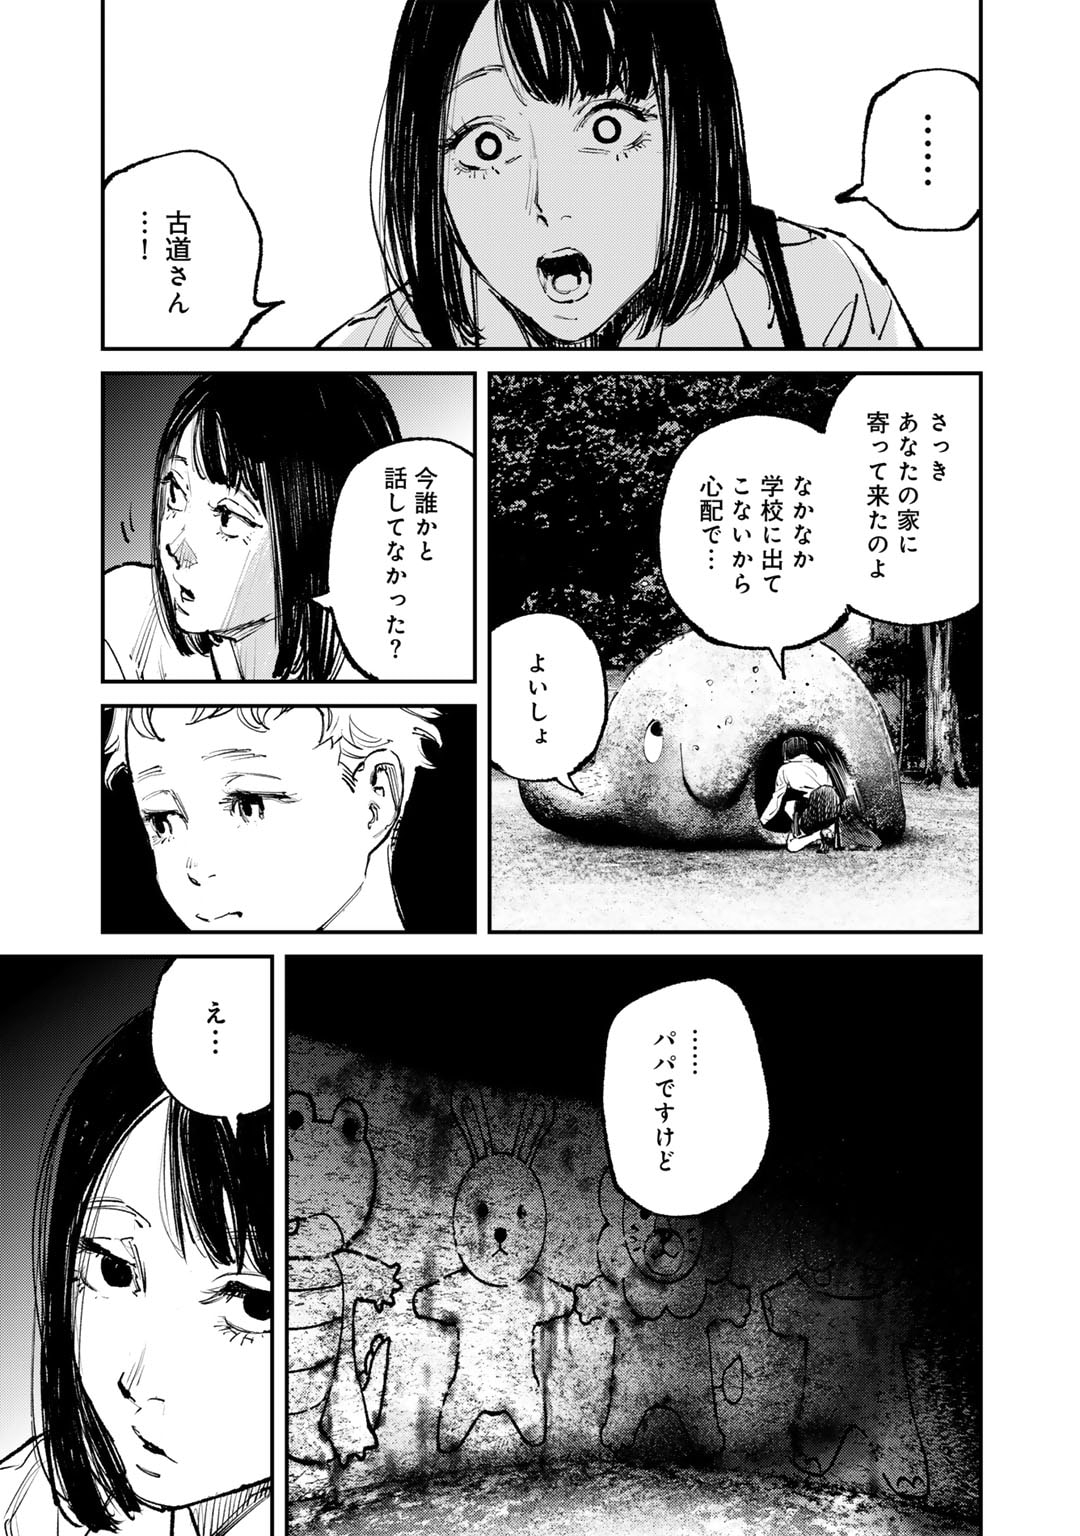 Kanata Is Into More Darker - Chapter 1 - Page 27